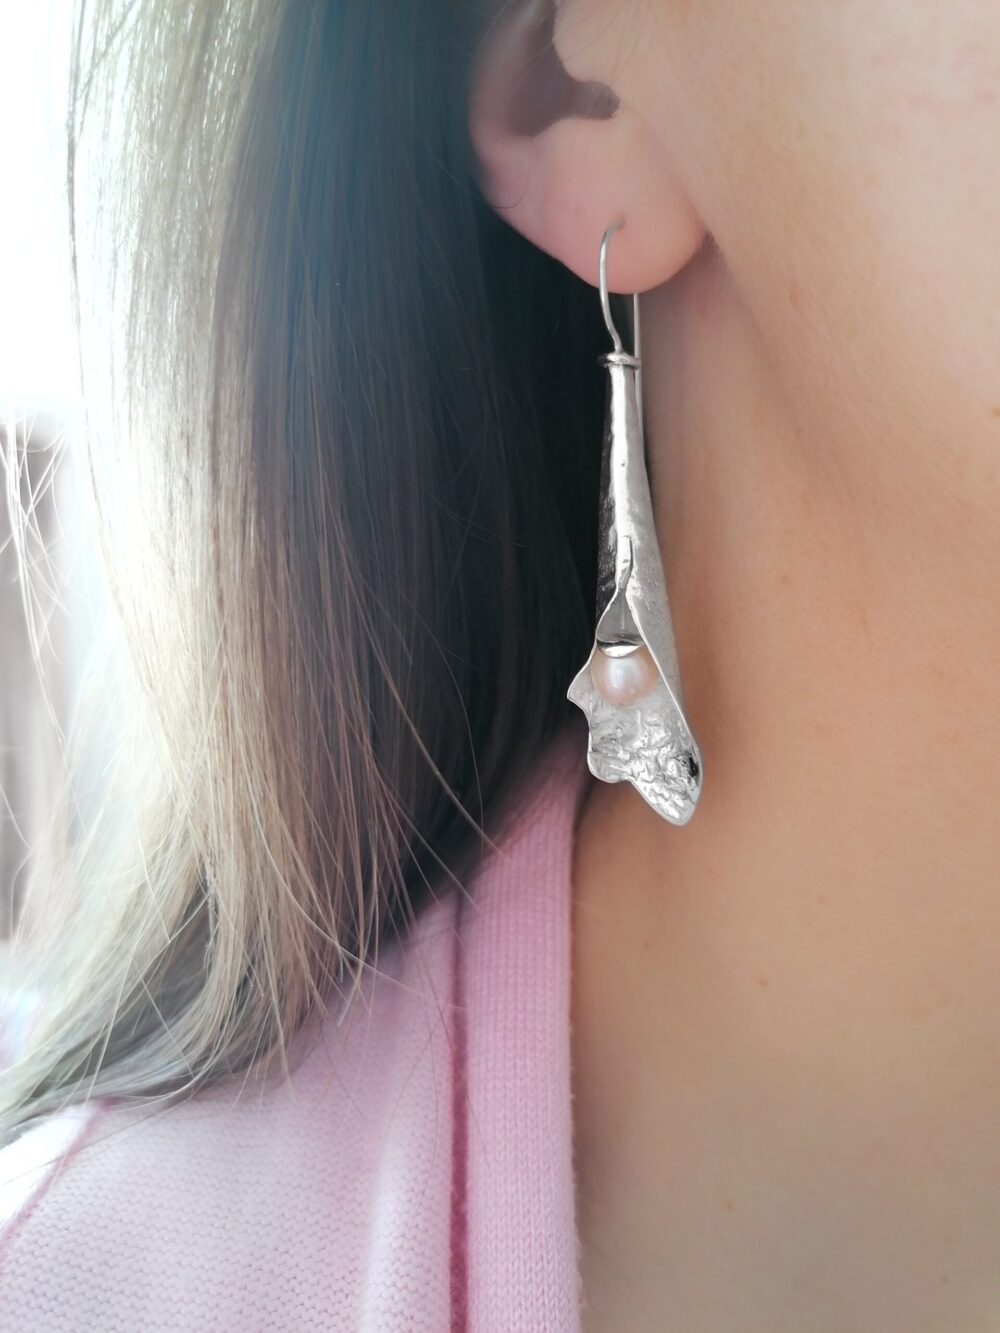 White Pearl Fuchsia earrings, Irish jewellery ethically handcrafted in textured sterling silver by Caraliza Designs